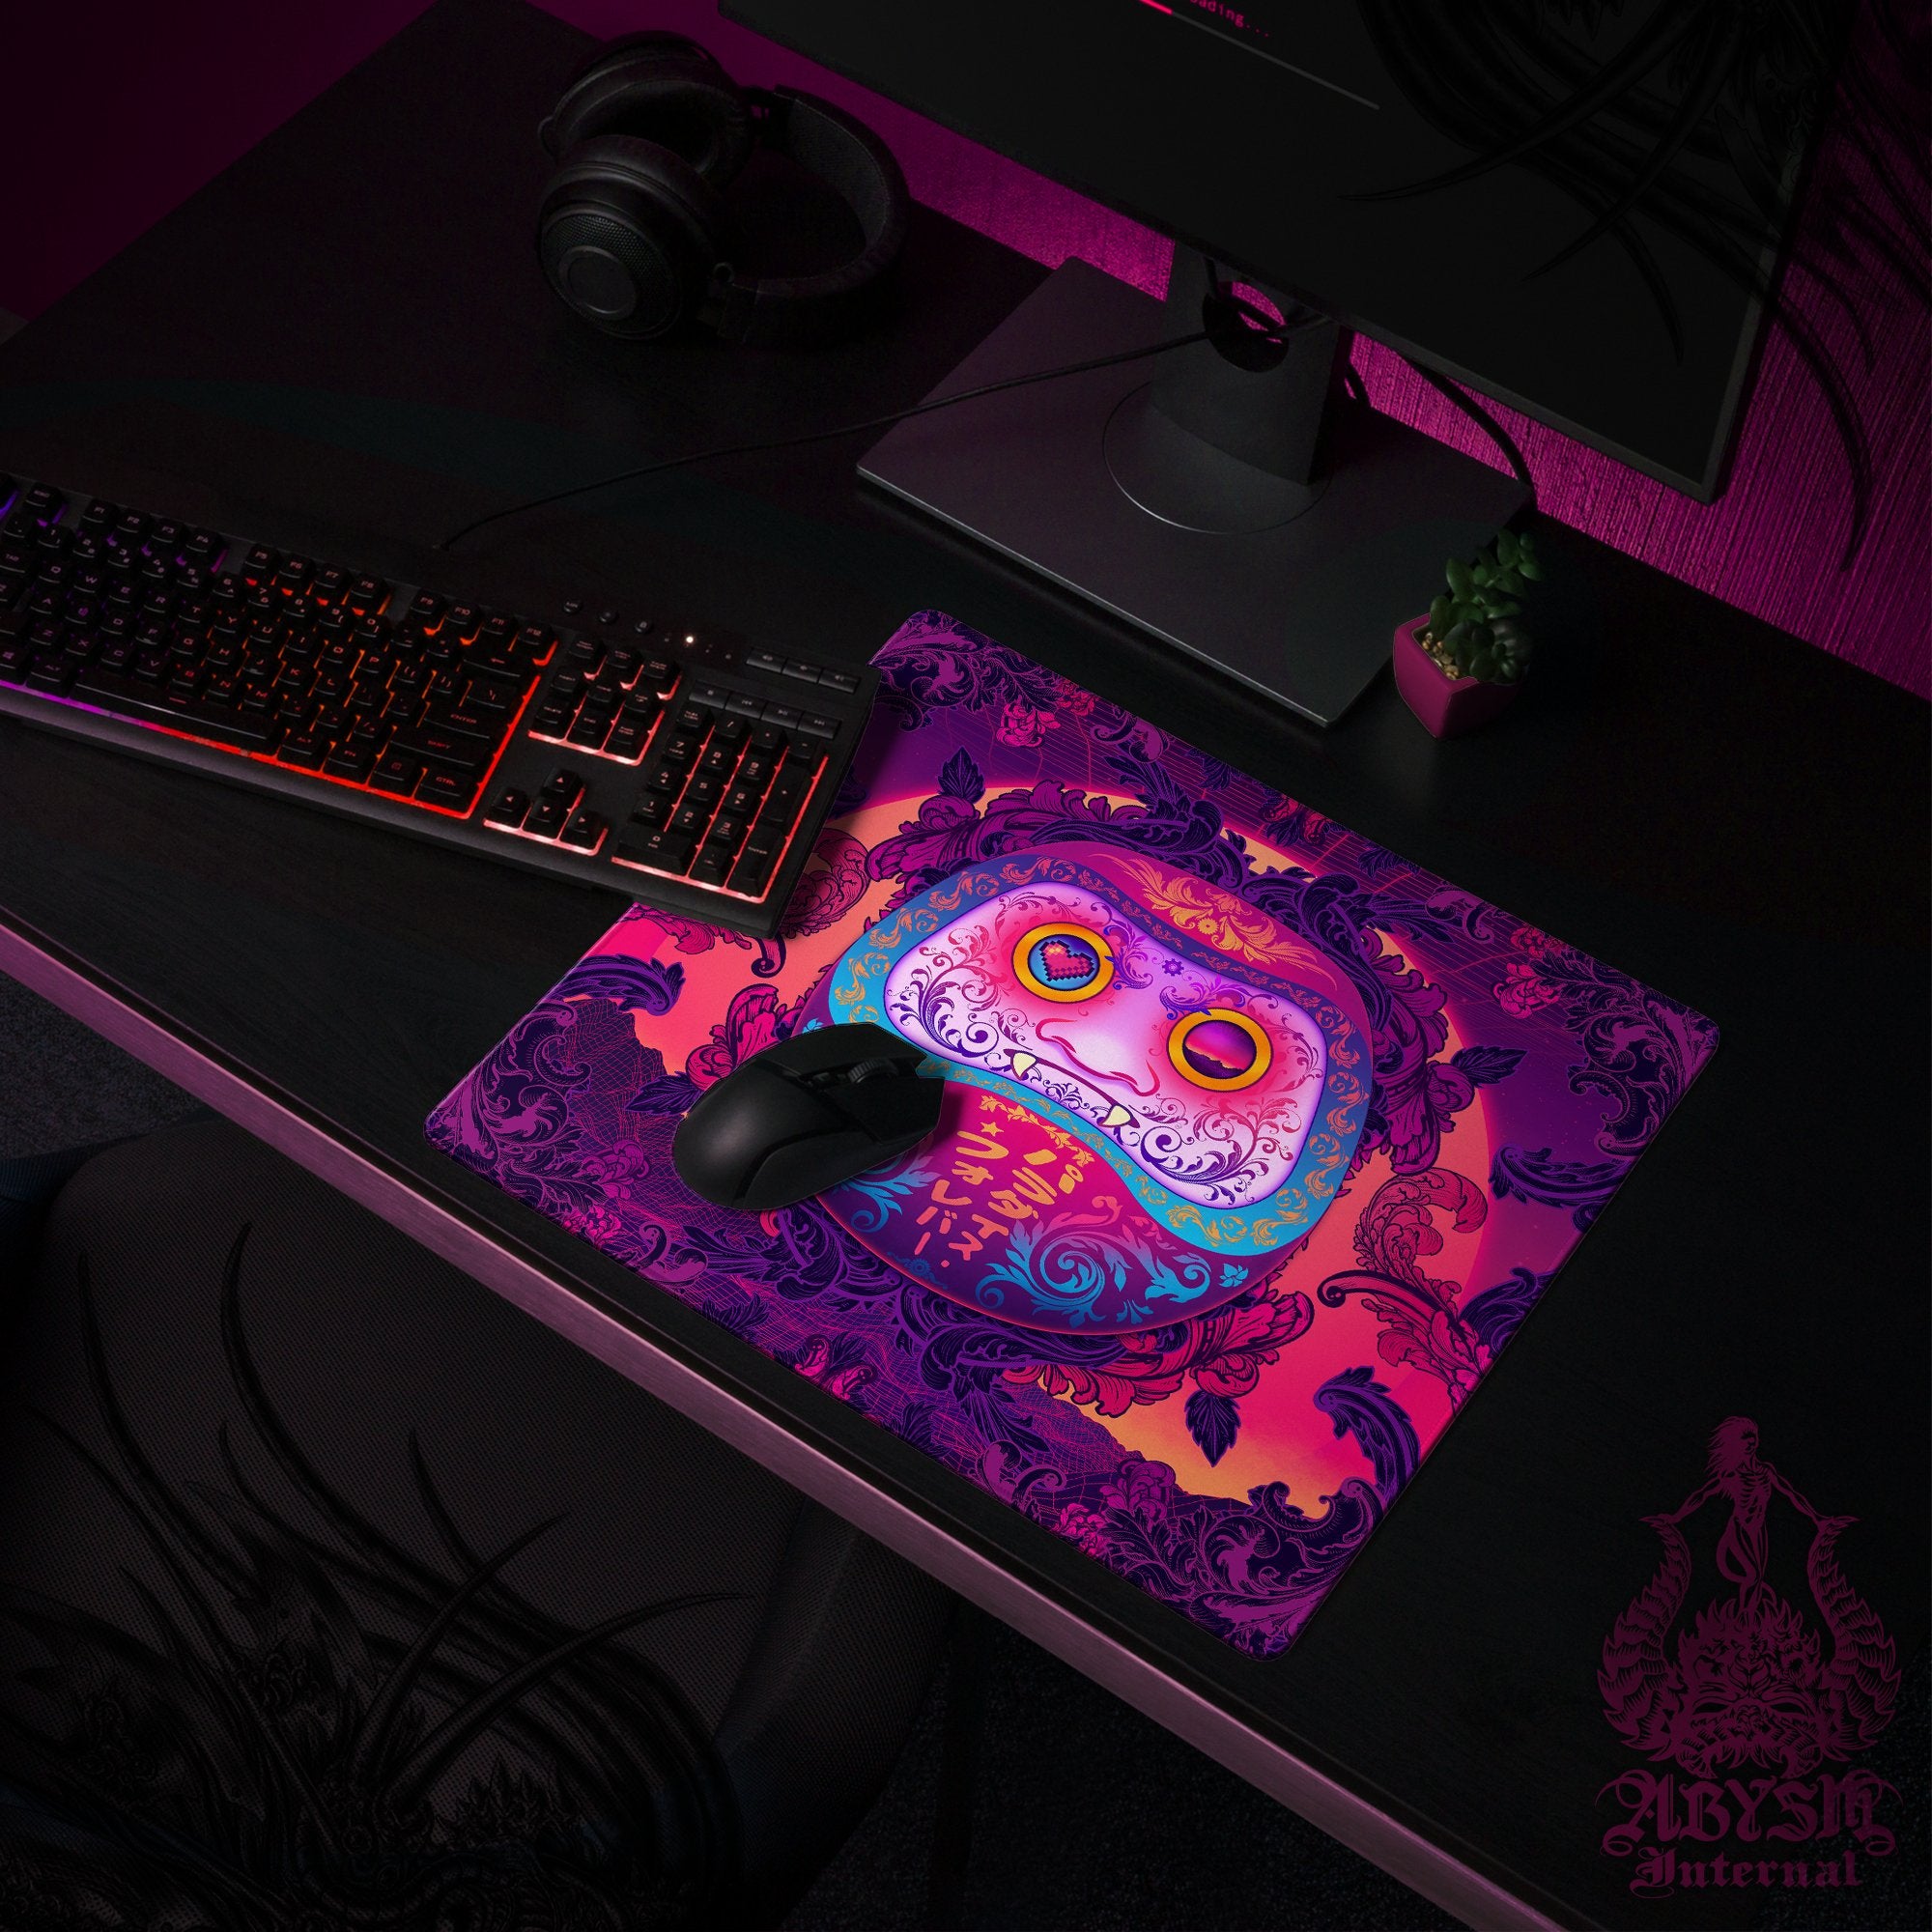 Psychedelic Gaming Desk Mat, Vaporwave Mouse Pad, Japanese Retrowave Table Protector Cover, Daruma Workpad, Mandga and Anime Art Print - Abysm Internal